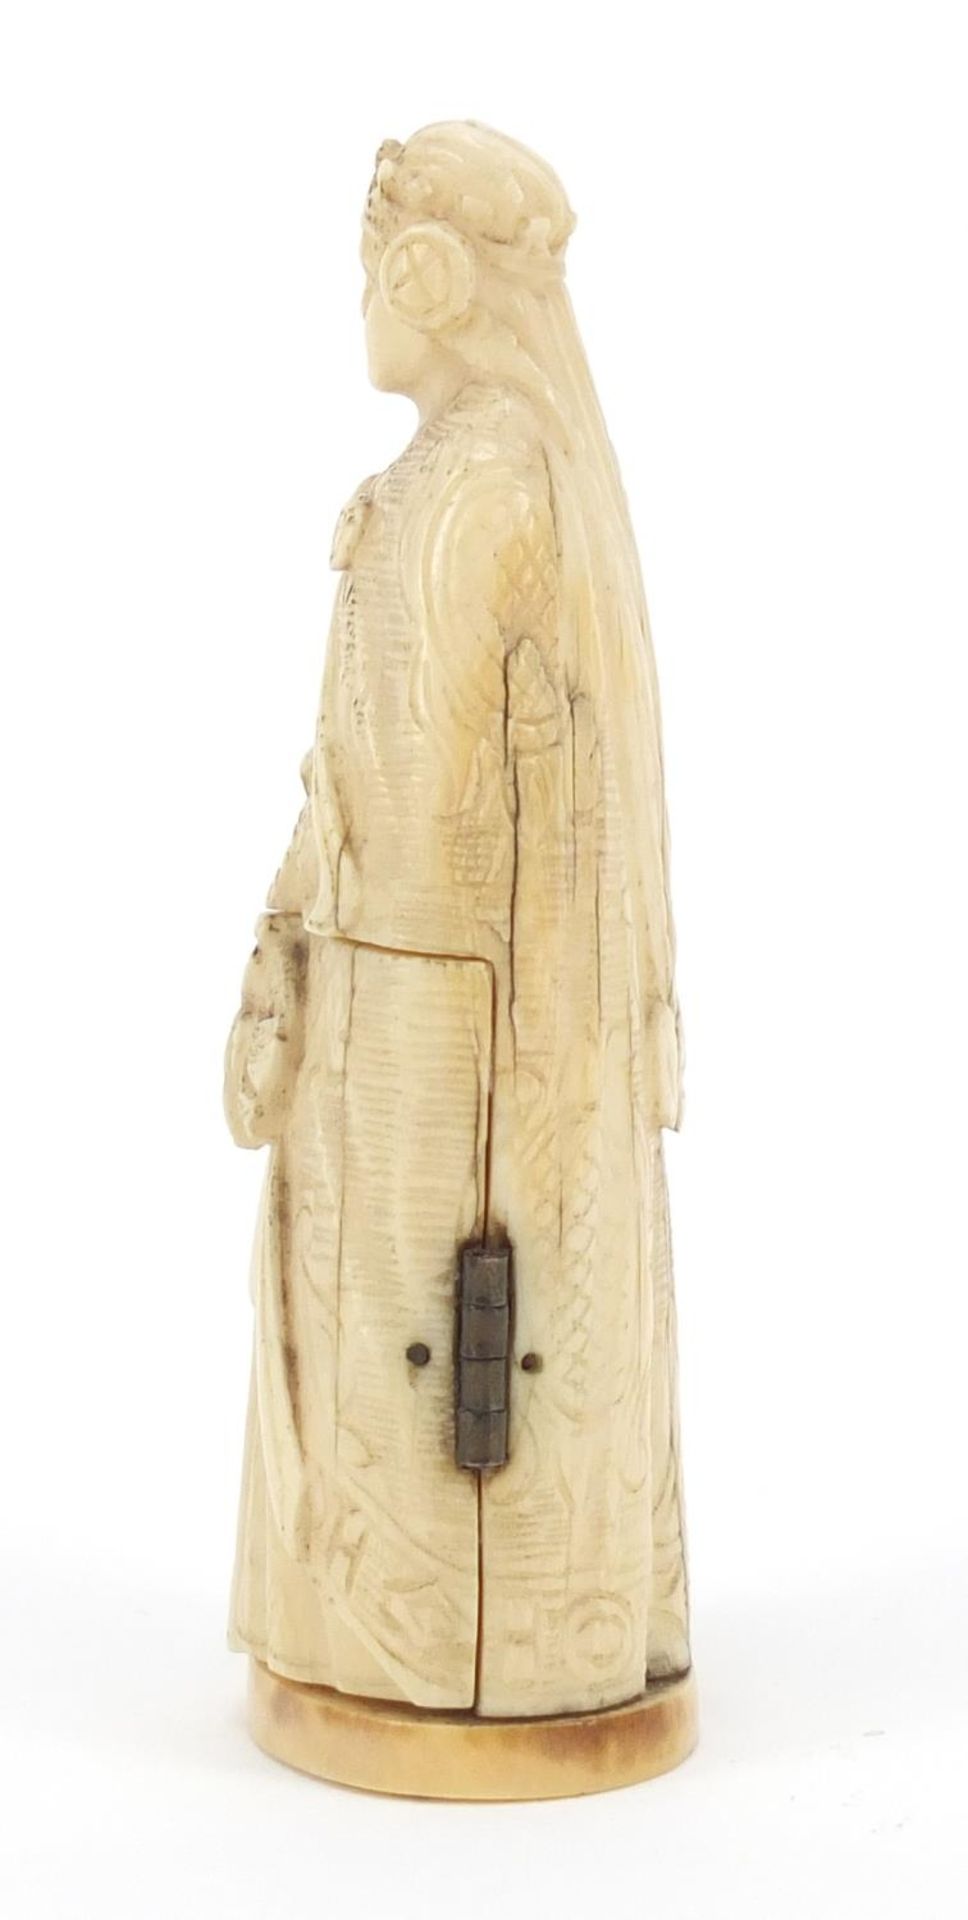 19th century French Dieppe carved ivory tryptych figure, 8.5cm high - Image 5 of 9